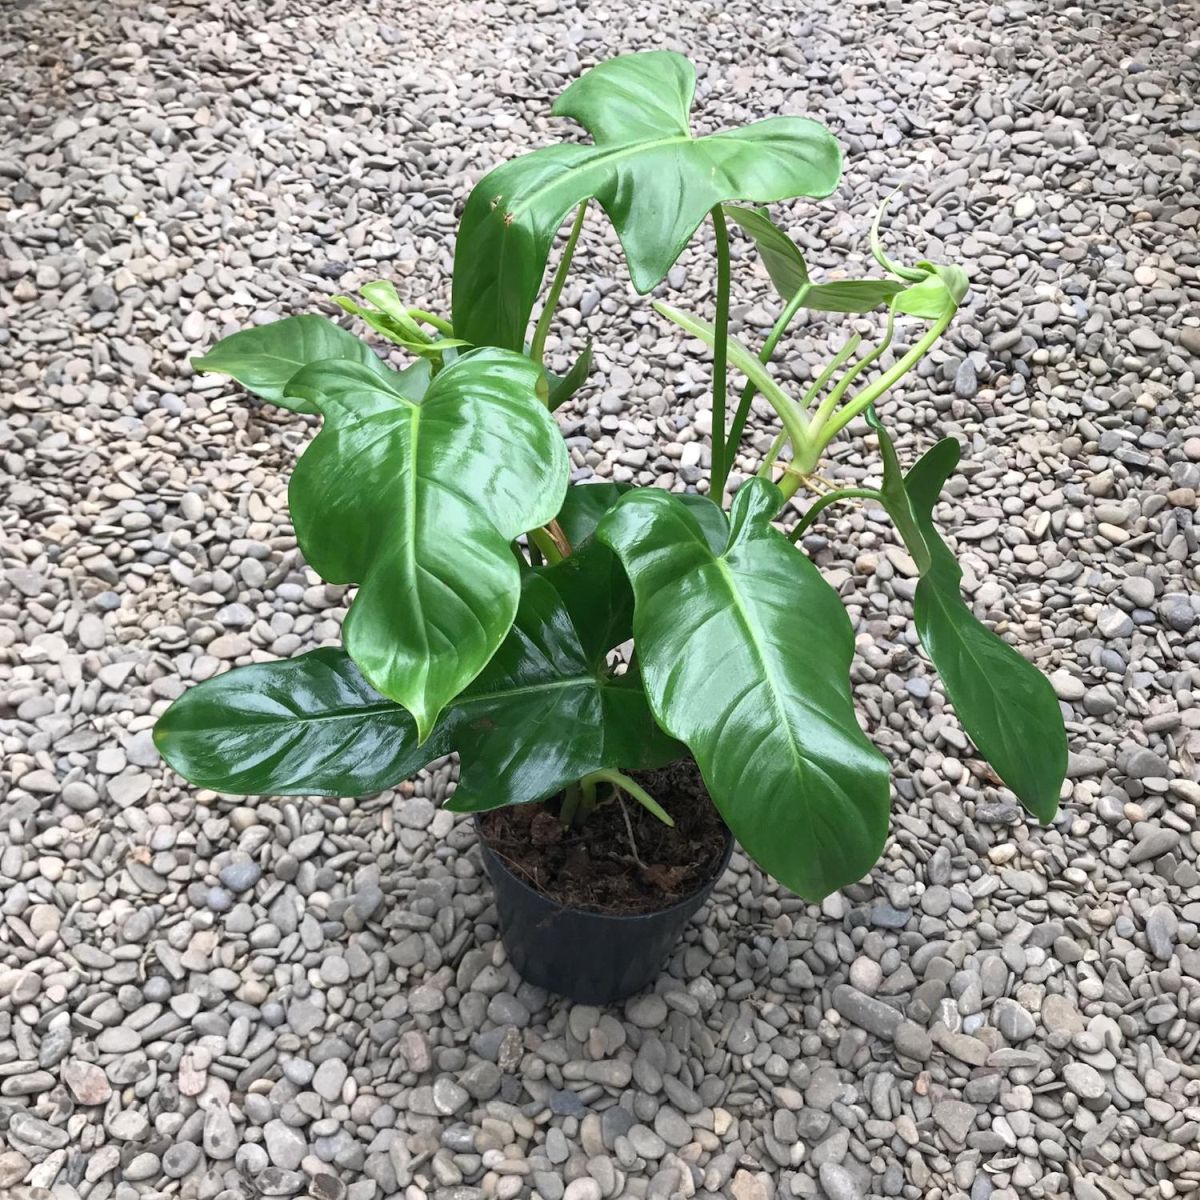 Soil and Fertilizer for the Horsehead Philodendron